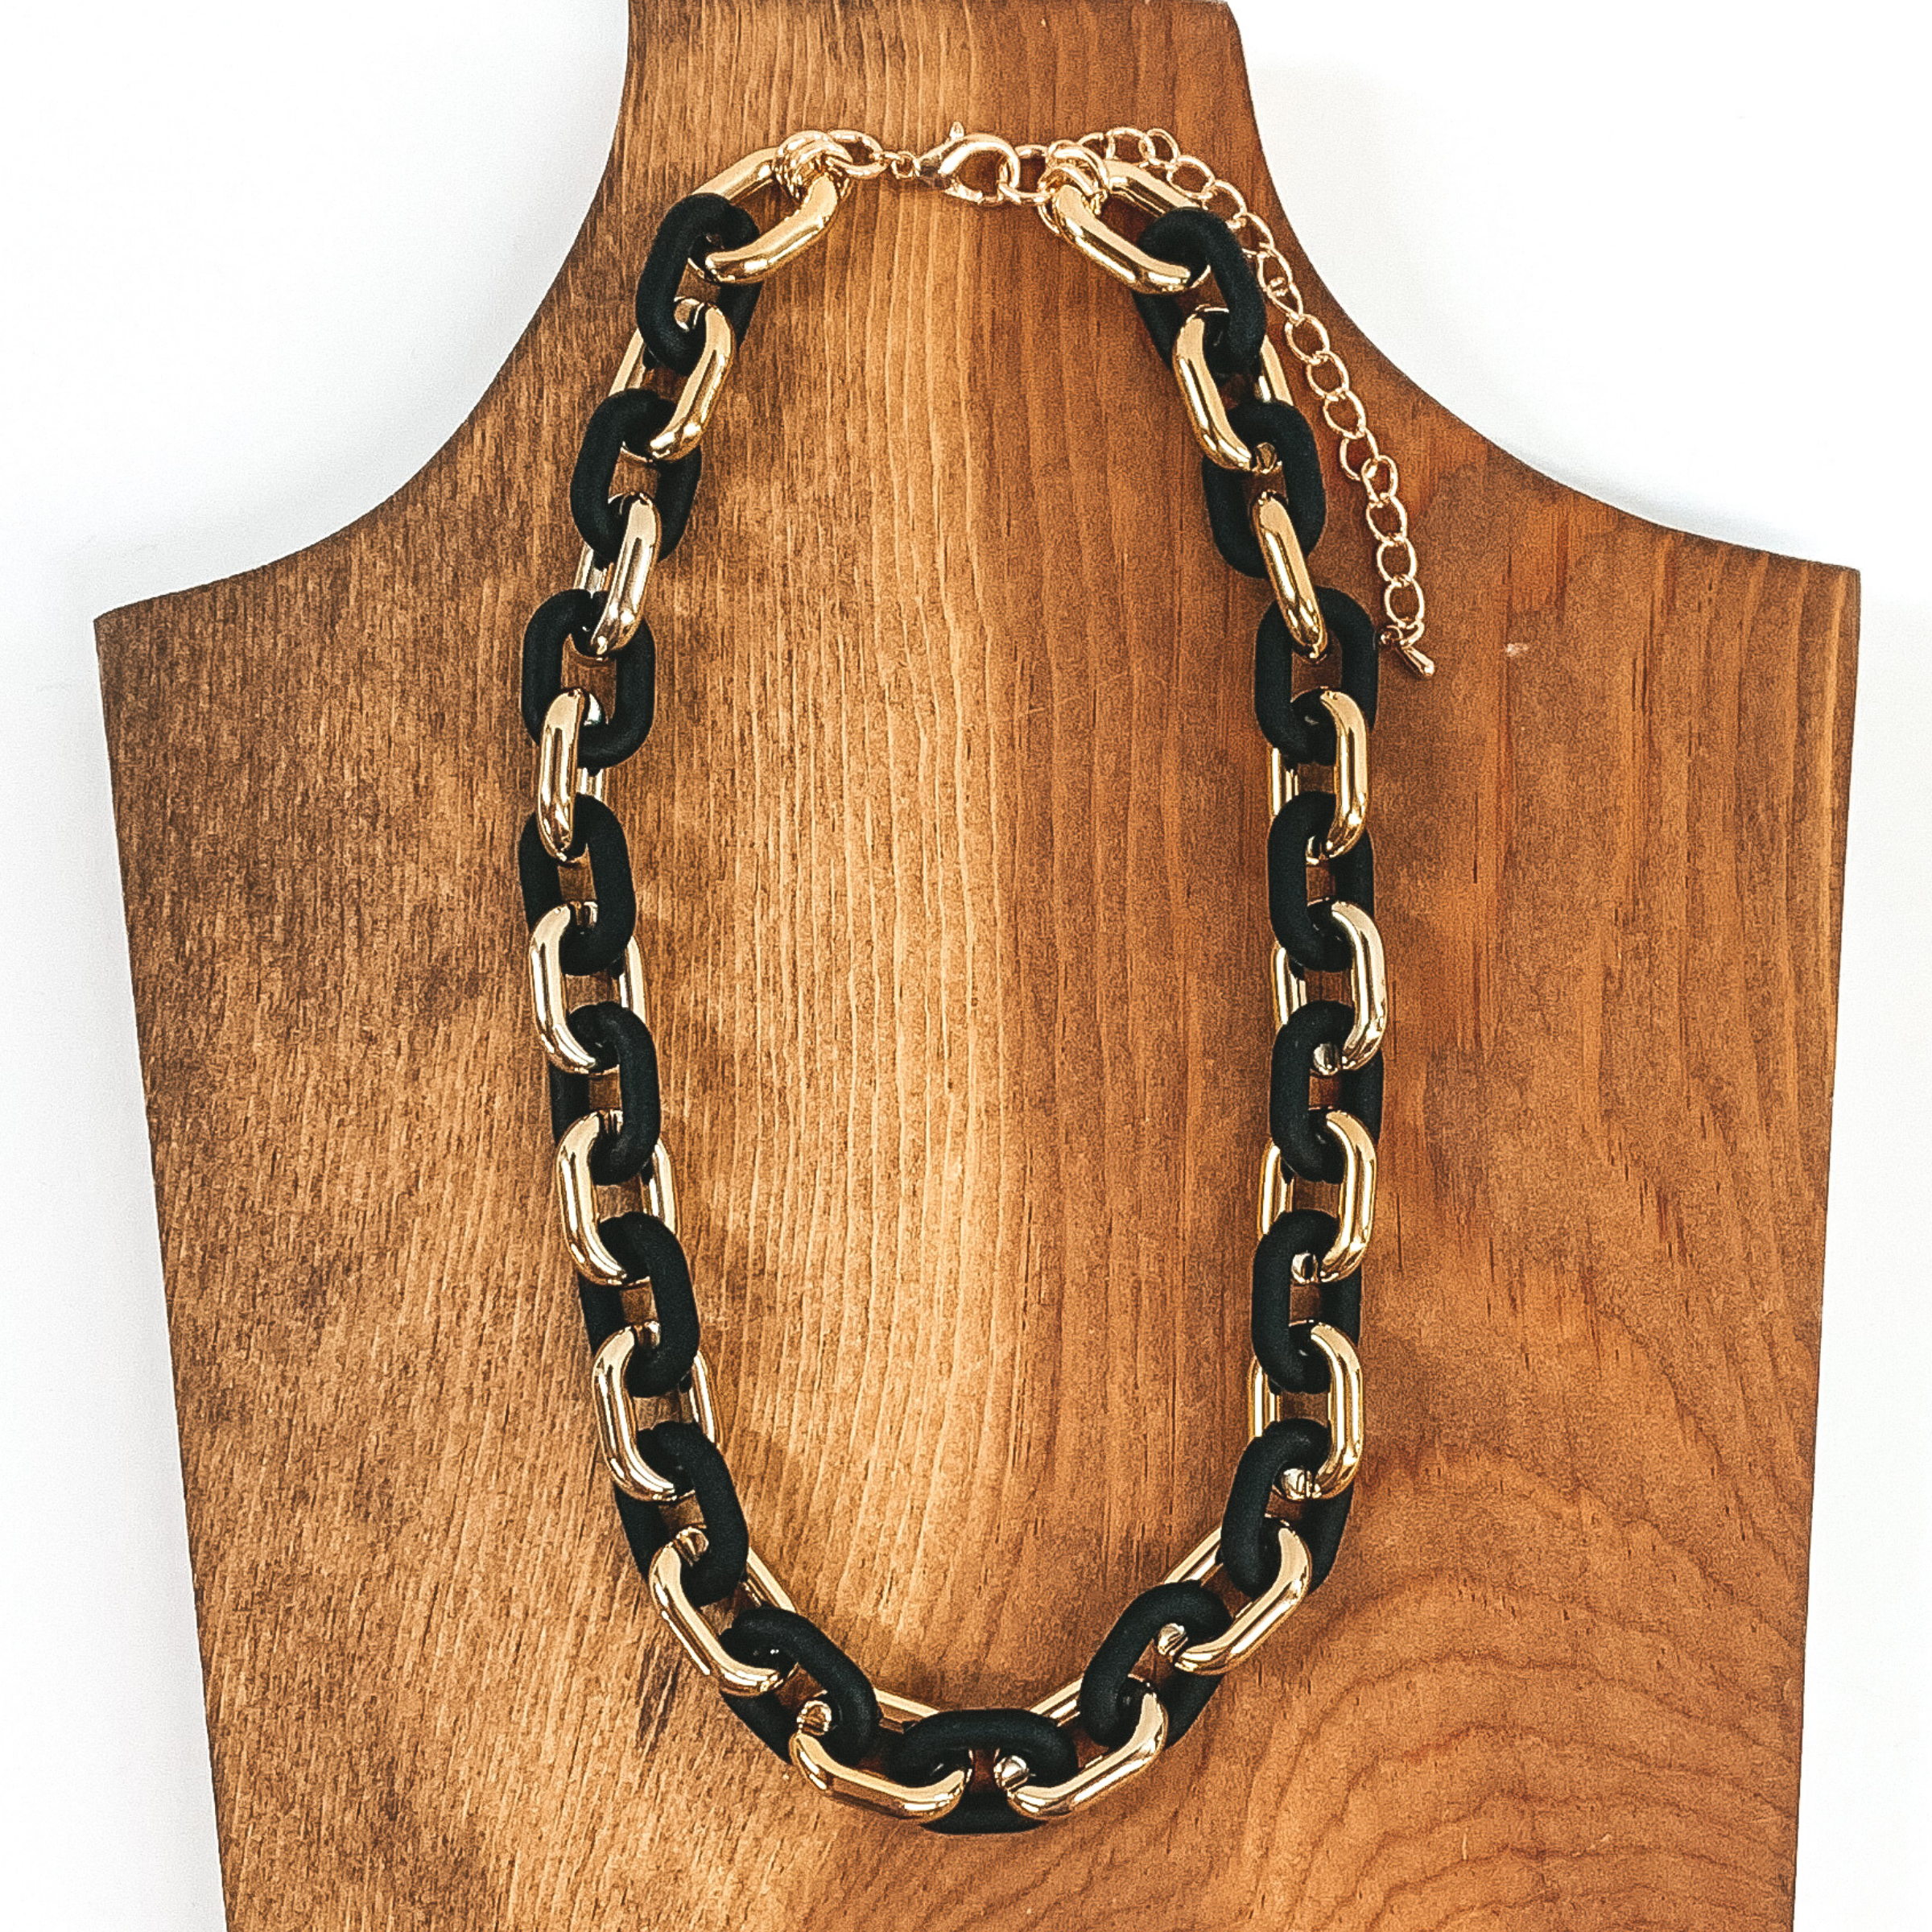 This necklace has thick gold and matte black links that repeat. It has a gold adjustable chain. This necklace is pictured of a piece of wood that is on a white background. 